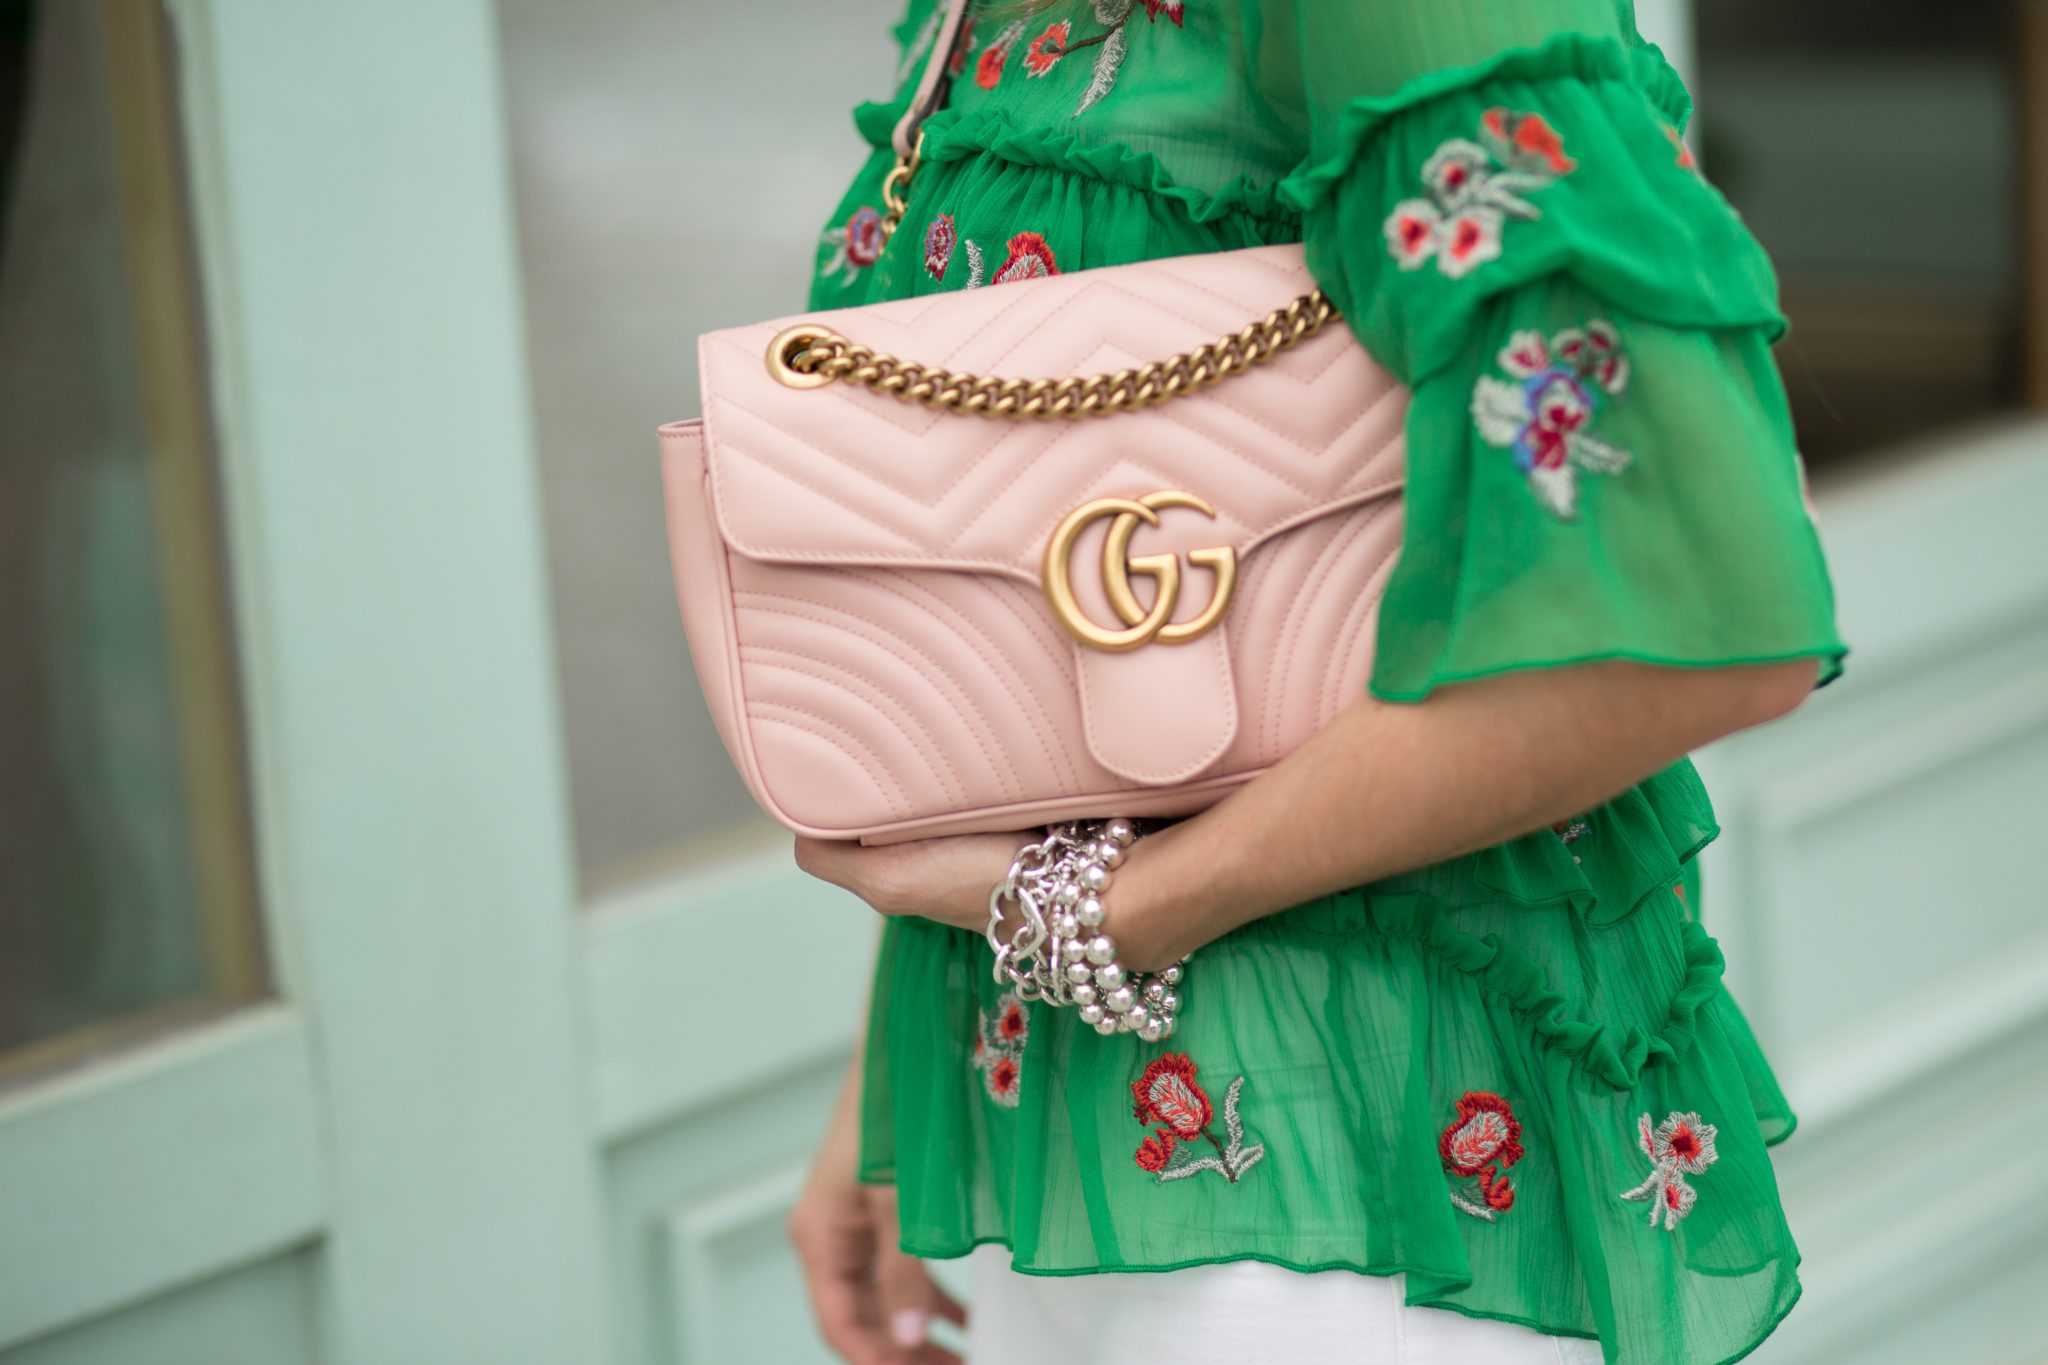 pink gucci marmont bag